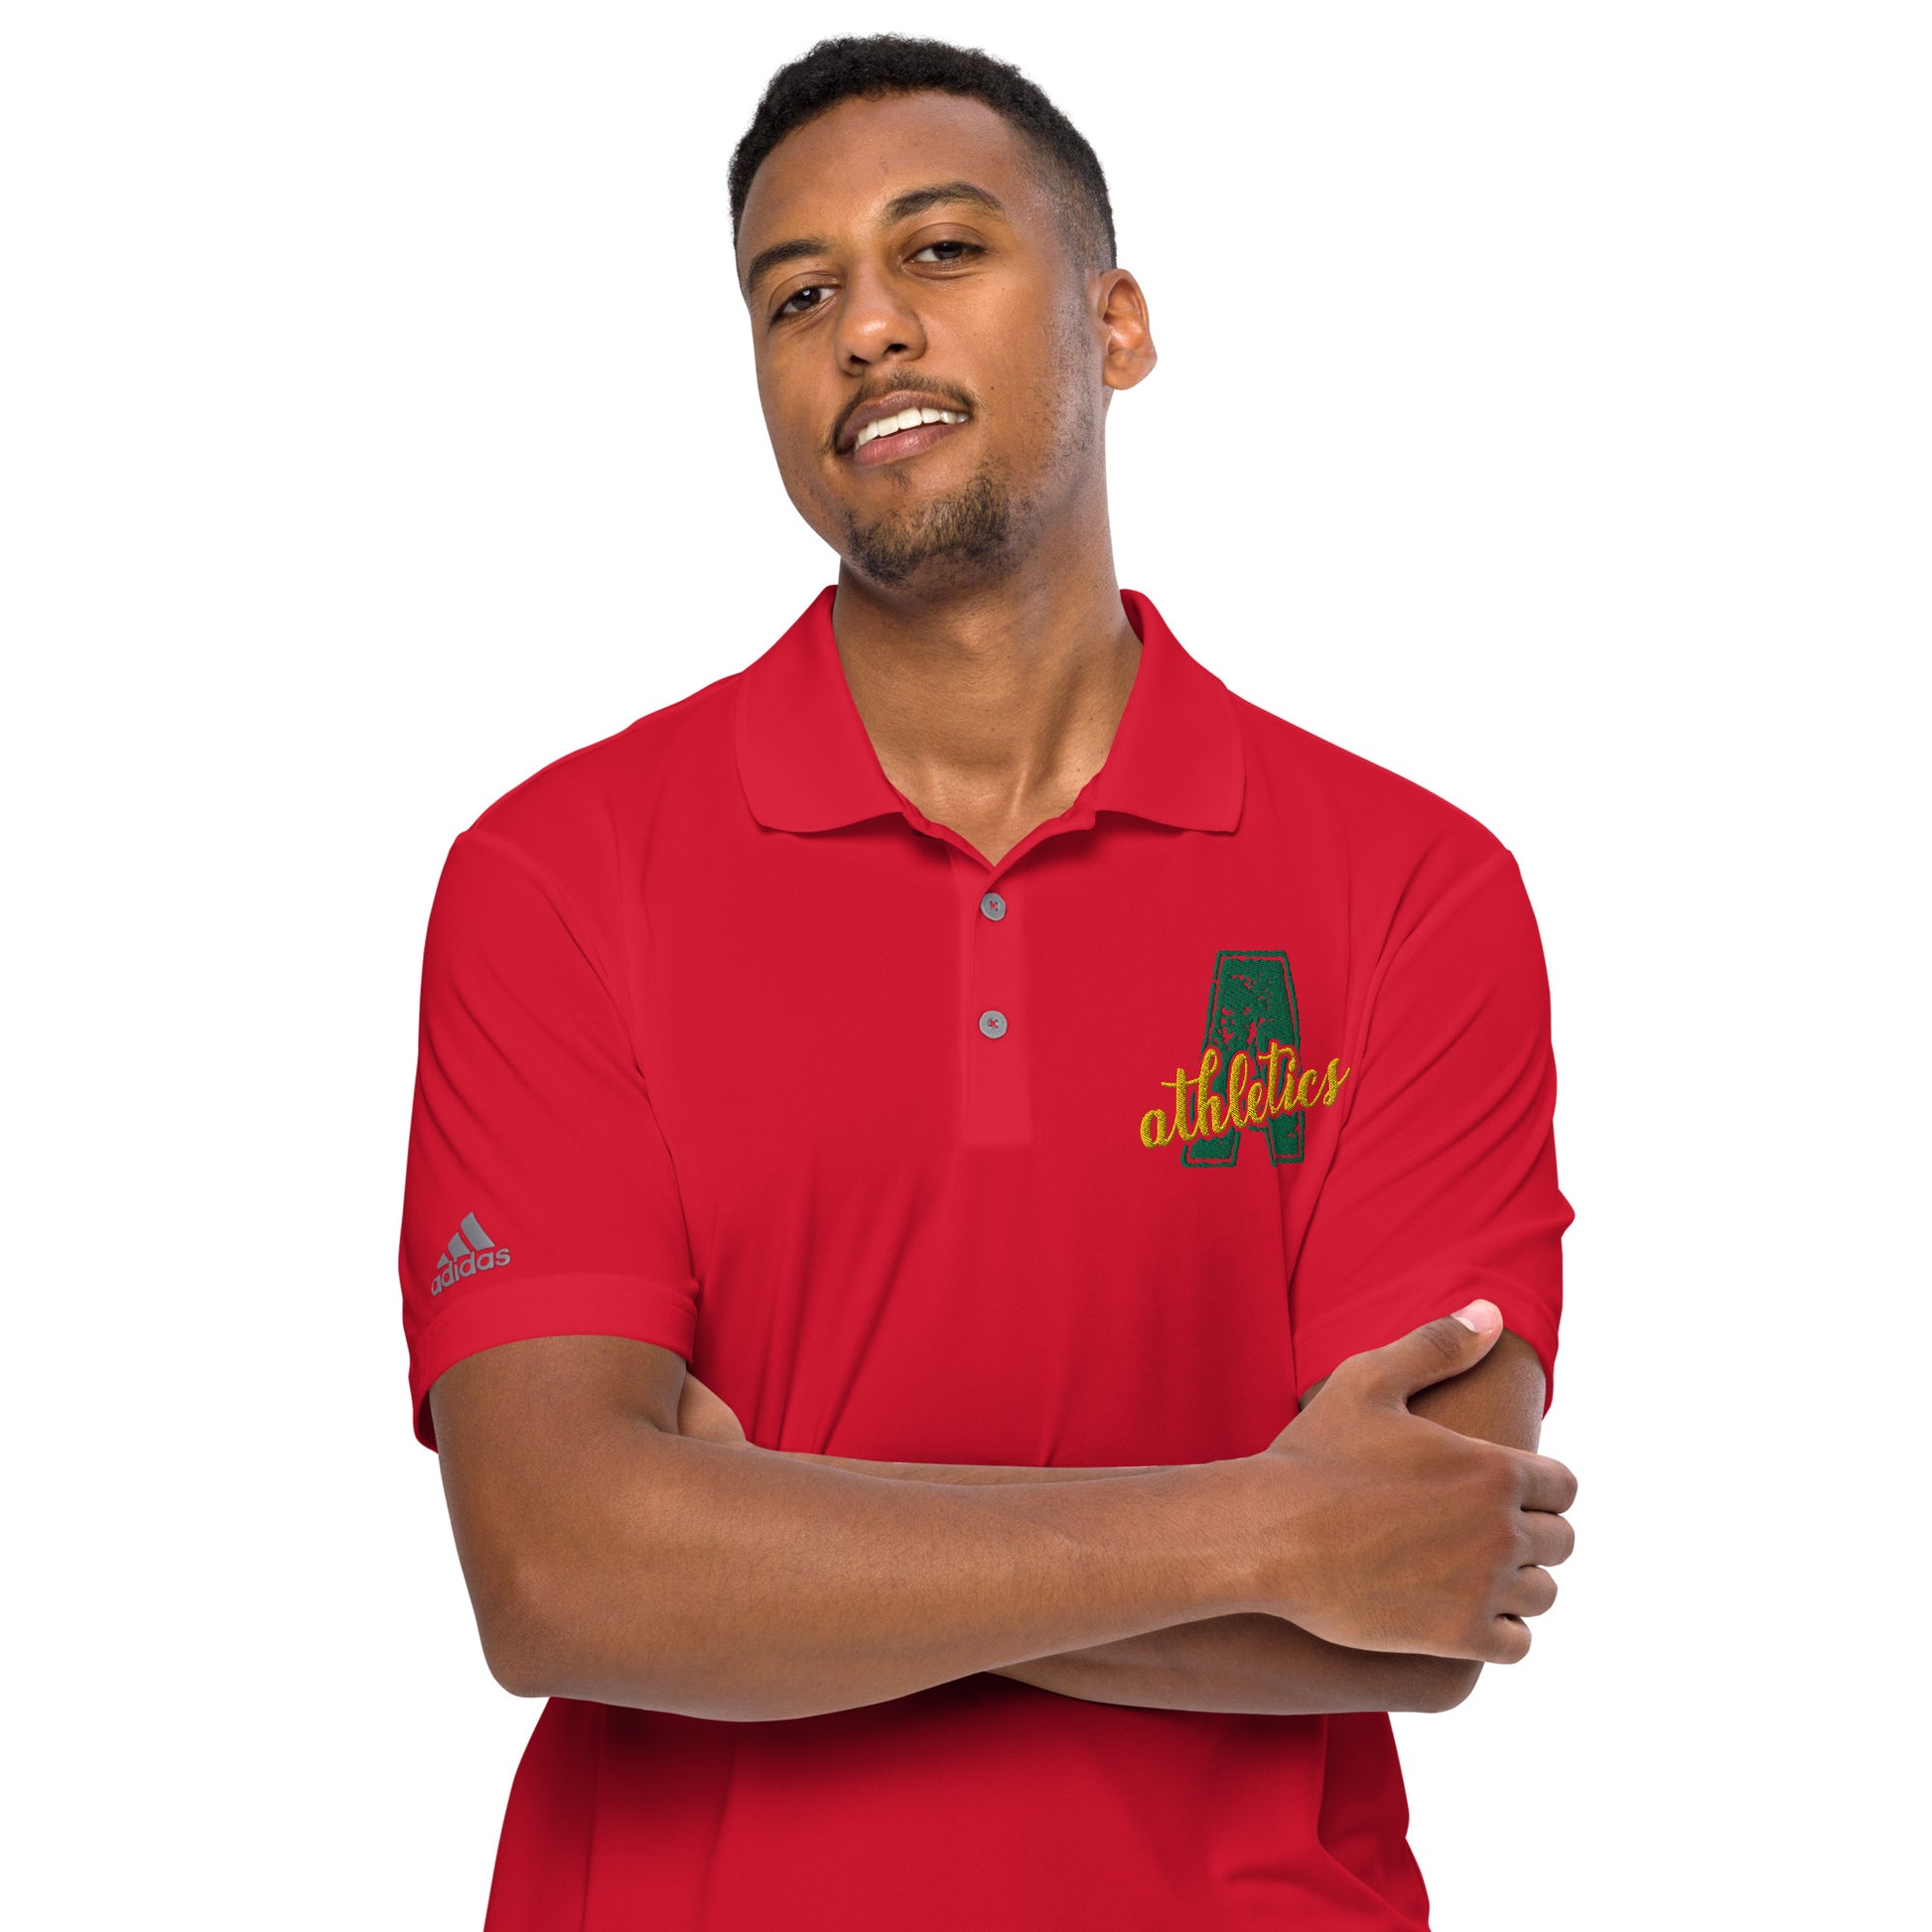 Athletics adidas performance polo shirt - Red / S - Sport Finesse